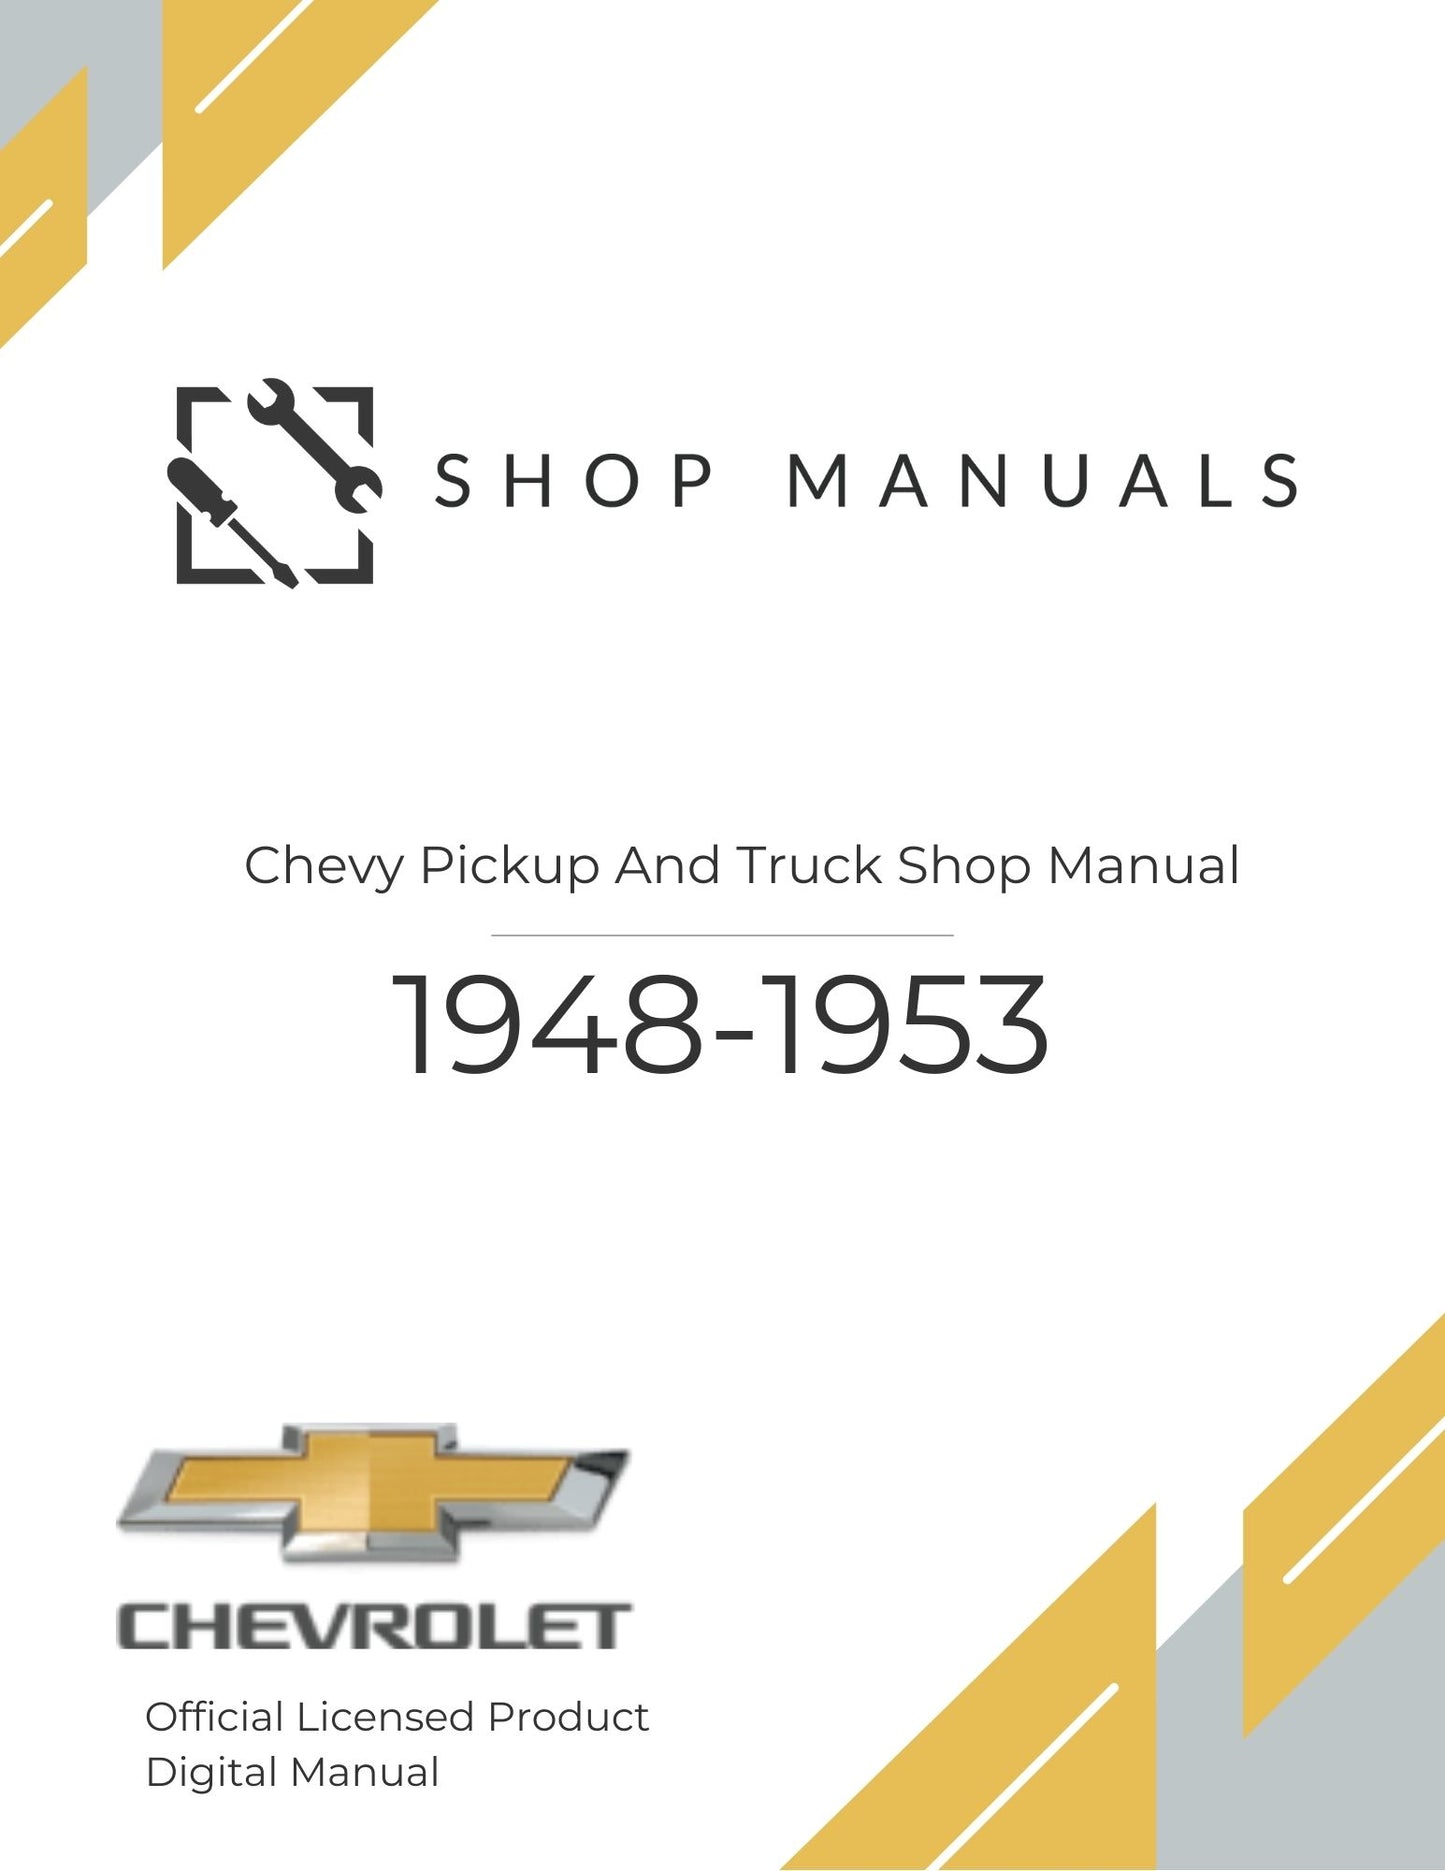 1948-1953 Chevy Pickup And Truck Shop Manual